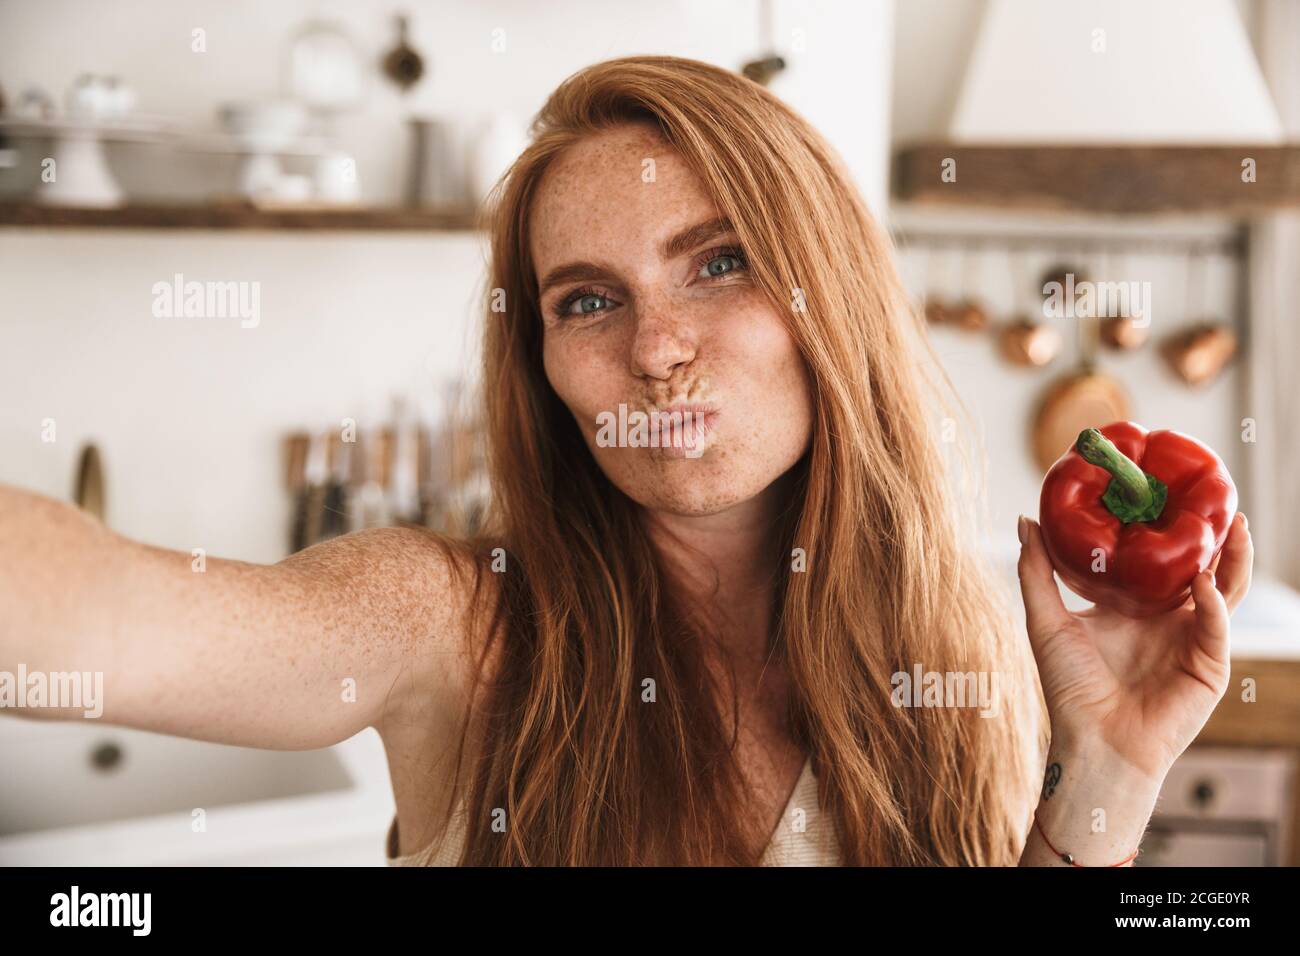 Image Of Happy Ginger Woman Taking Selfie Photo And Making Kiss Lips While Cooking At Cozy 